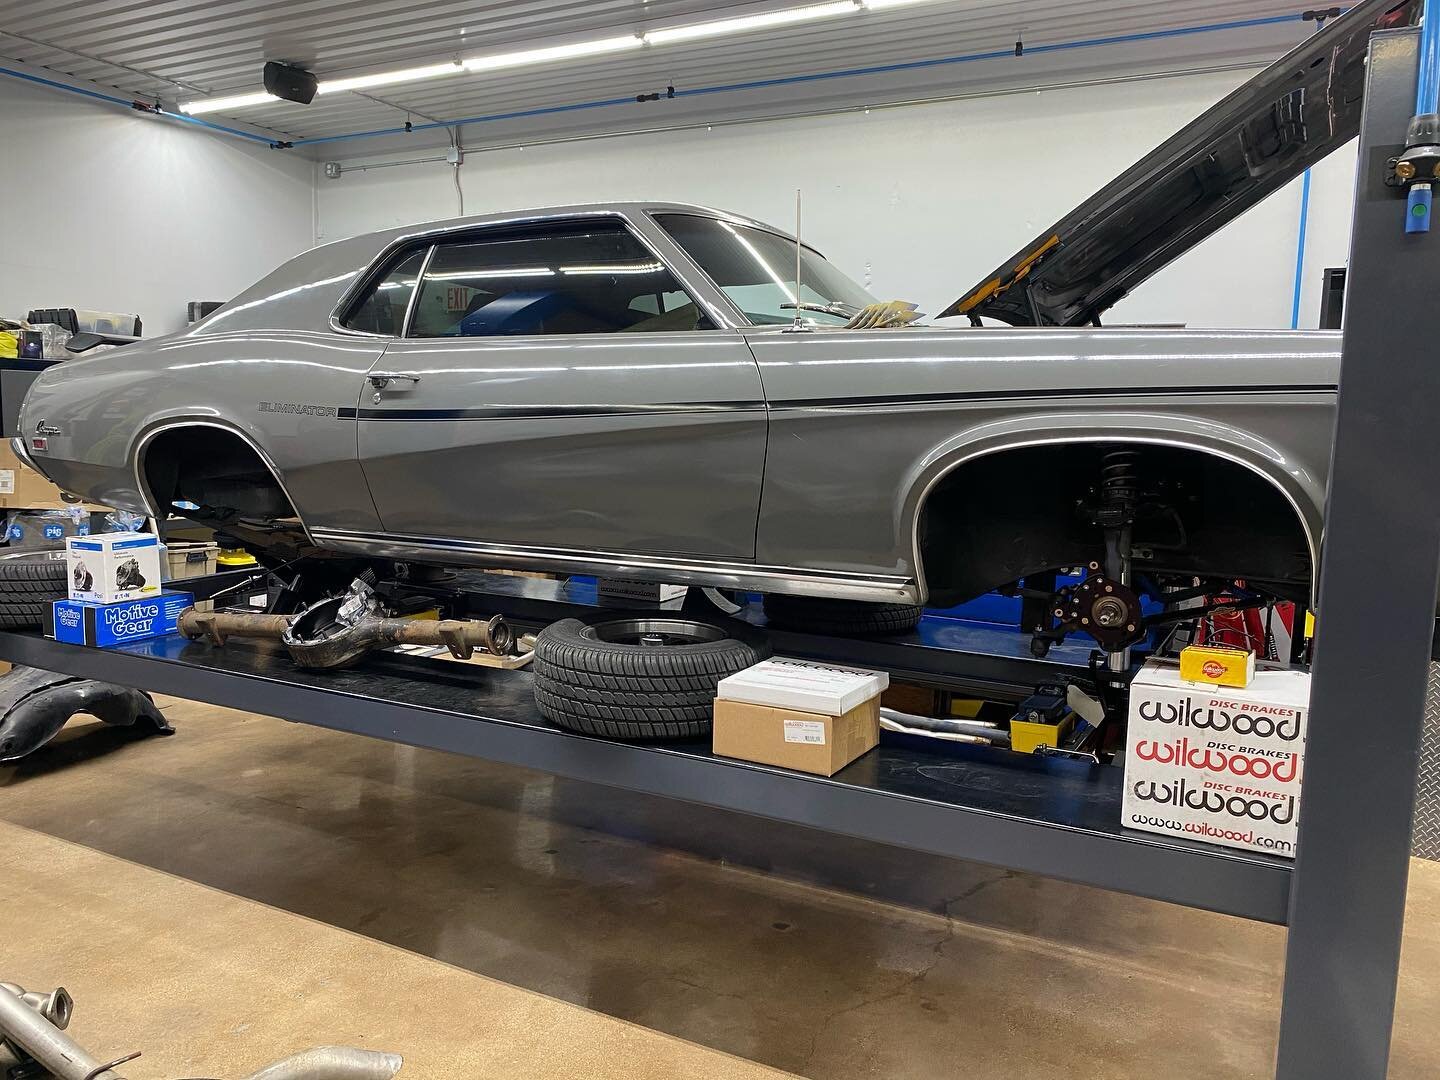 The 1969 Cougar is coming along. Rebuilt the 9in rear end with a trutrac and 3:70 gears, new @bowlertransmissions 4r70w, @wchracingengines built the 351w short block for me so I could put the motor together, @wilwooddiscbrakes on all 4 corners and @e